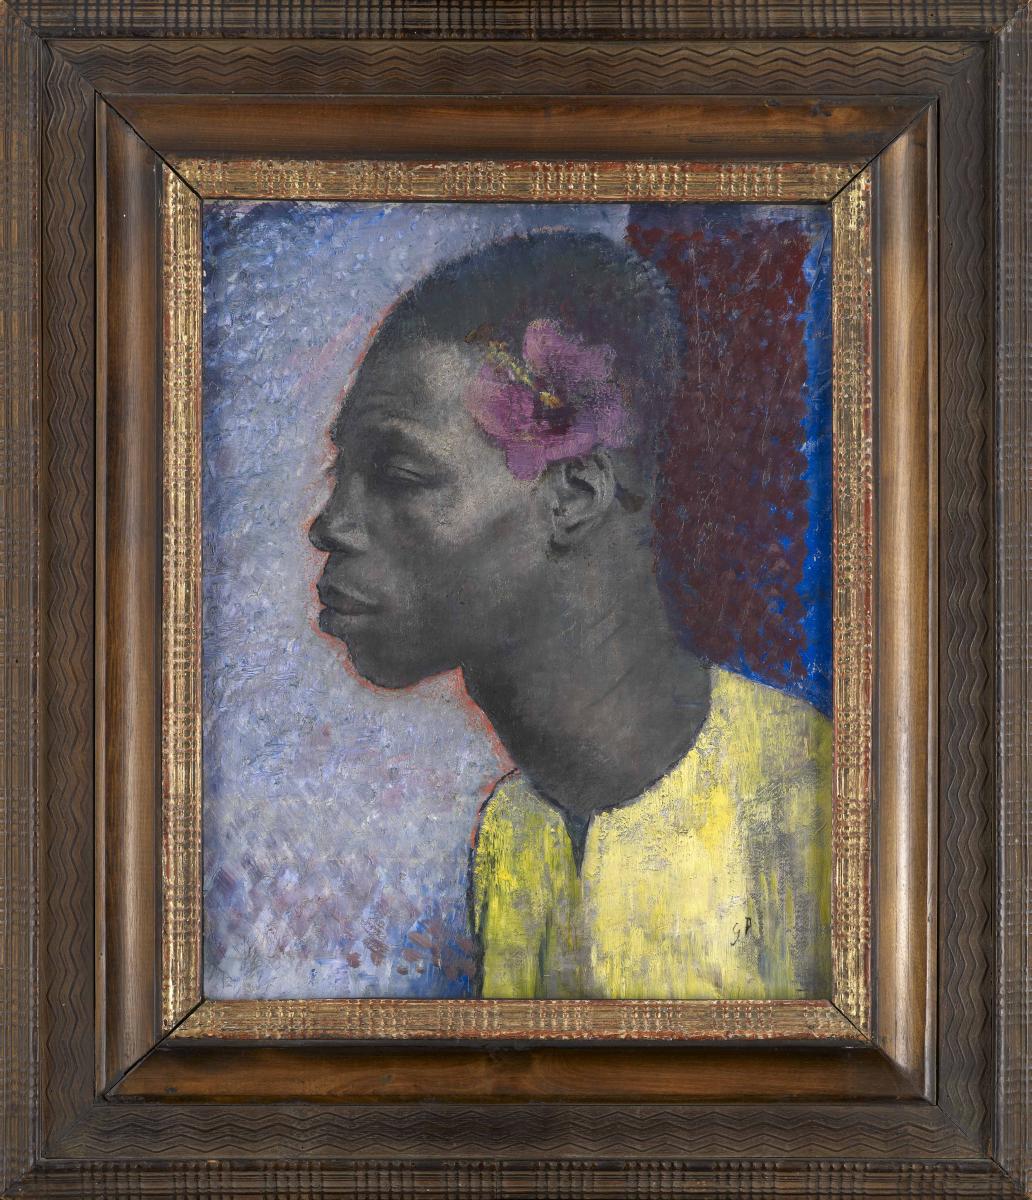 Glyn Philpot, Profile of a Man with Hibiscus Flower (Félix) 1932, Oil on canvas, Private Collection, Image courtesy Daniel Katz Gallery, London